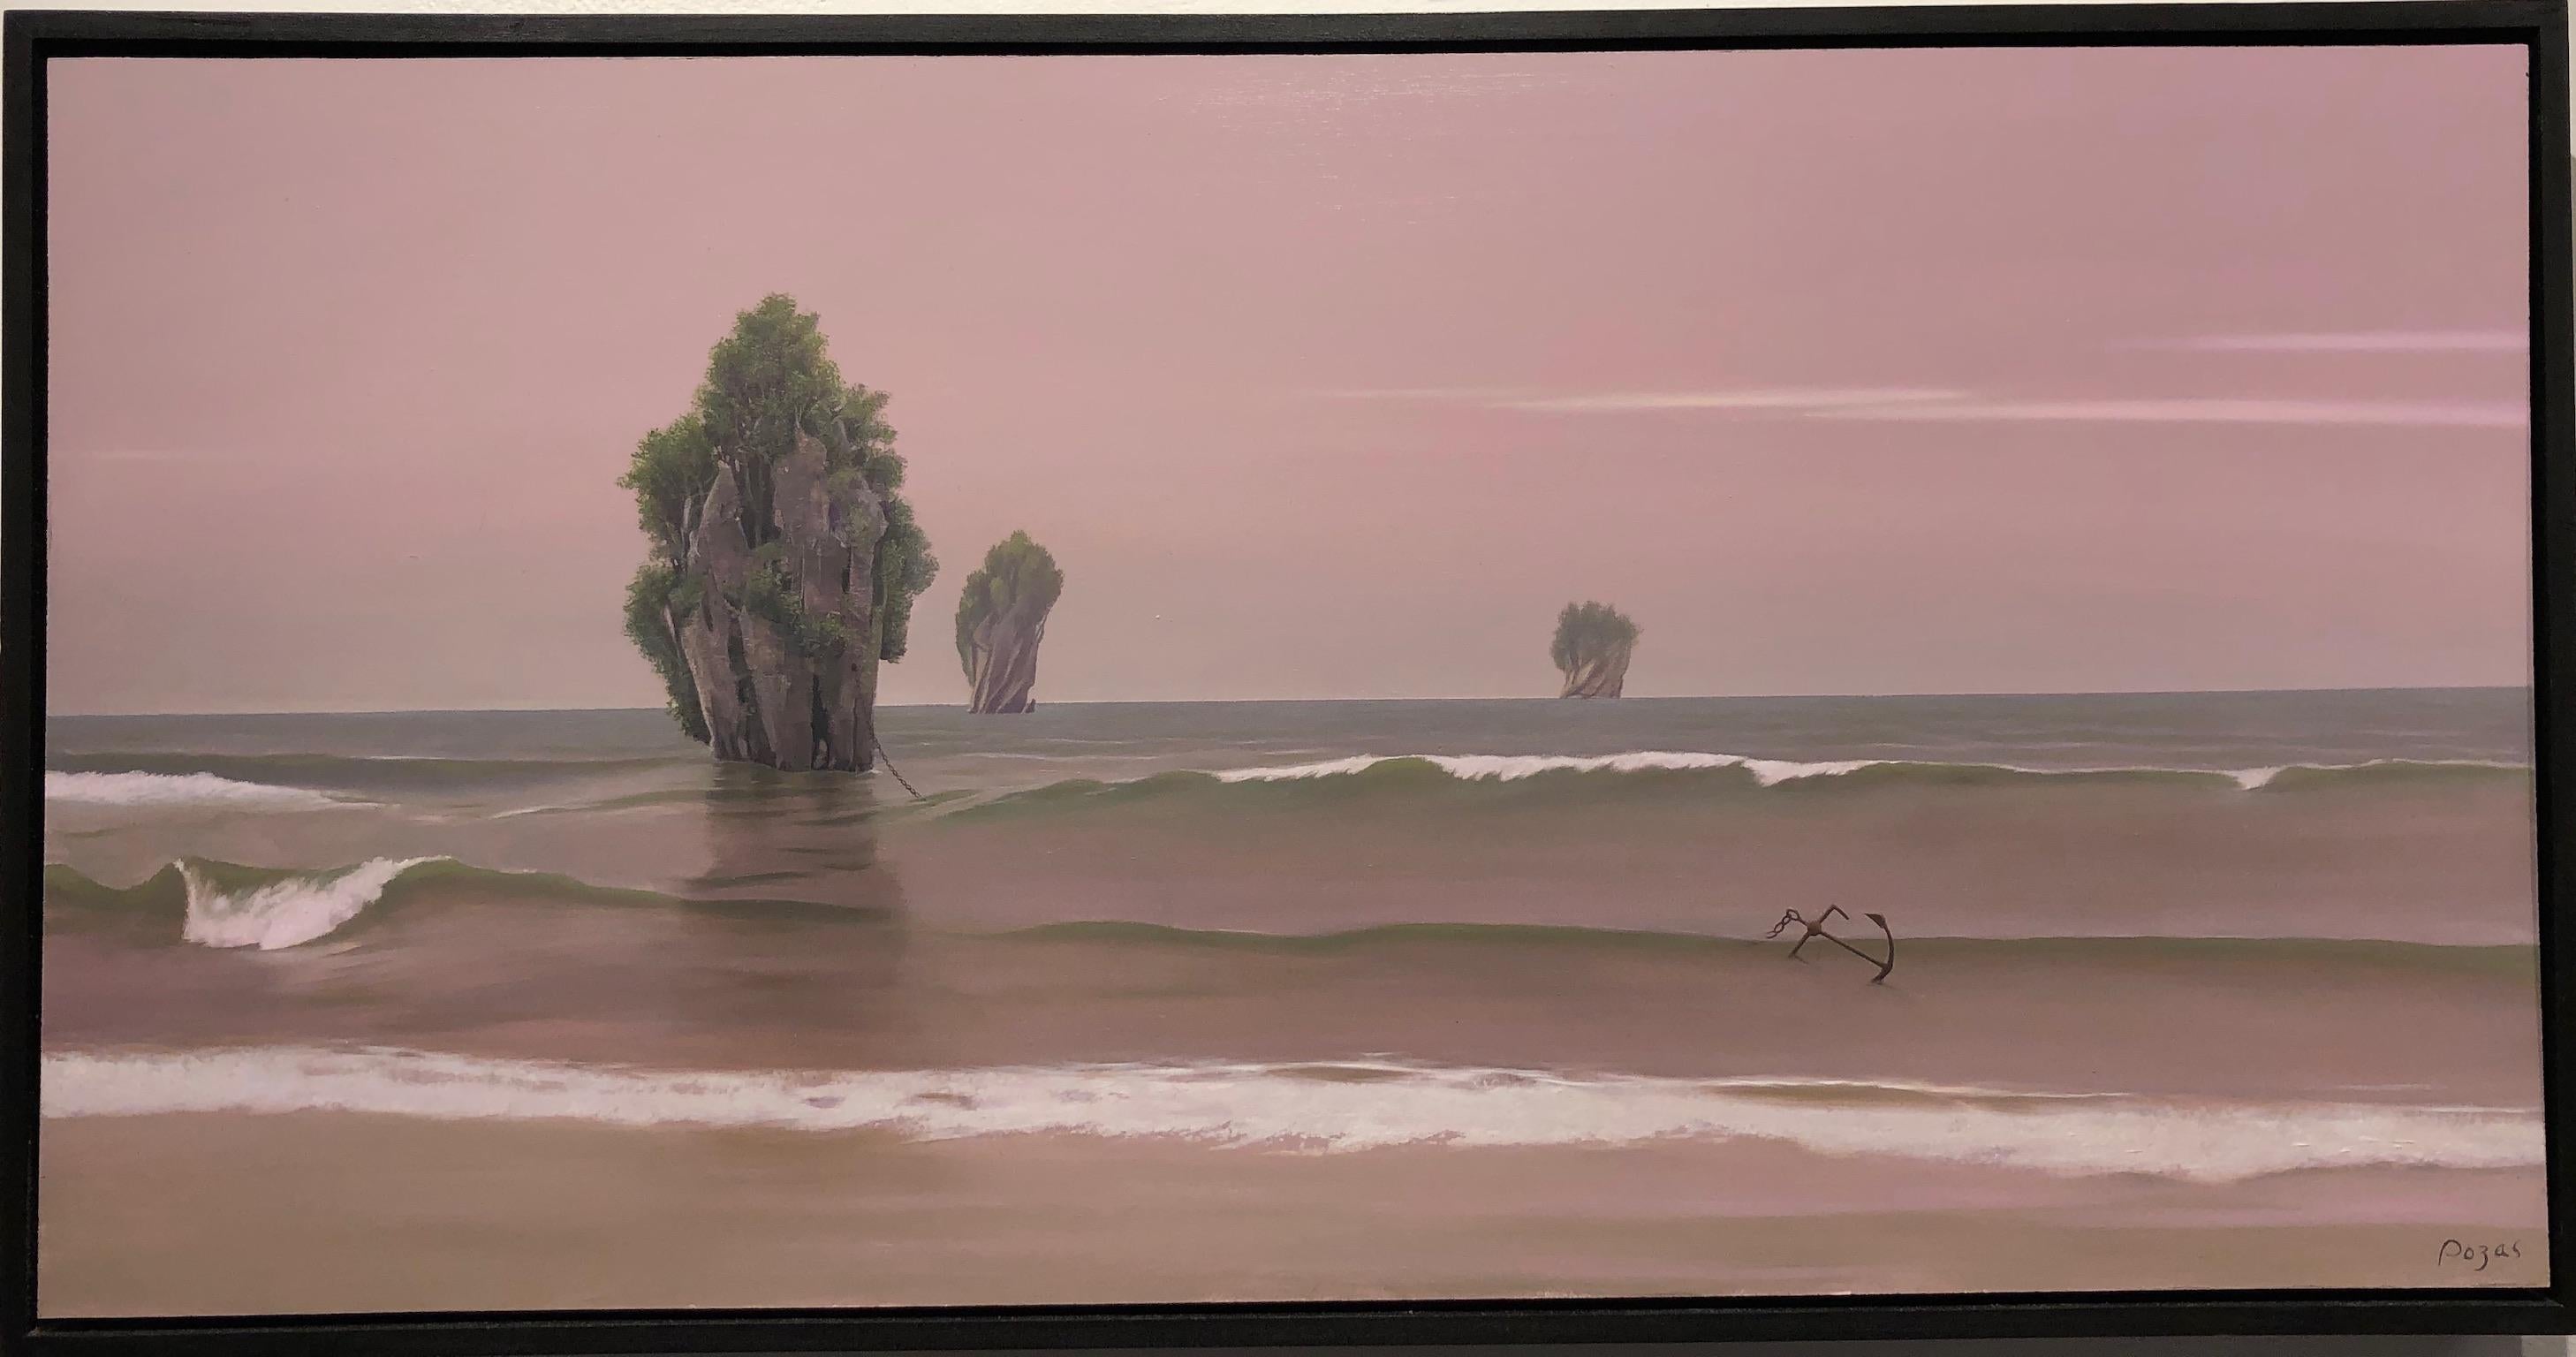 Beginning of a Dream, Surreal Ocean Landscape in Shades of Pink and Green - Painting by René Monzón Relova “Pozas”